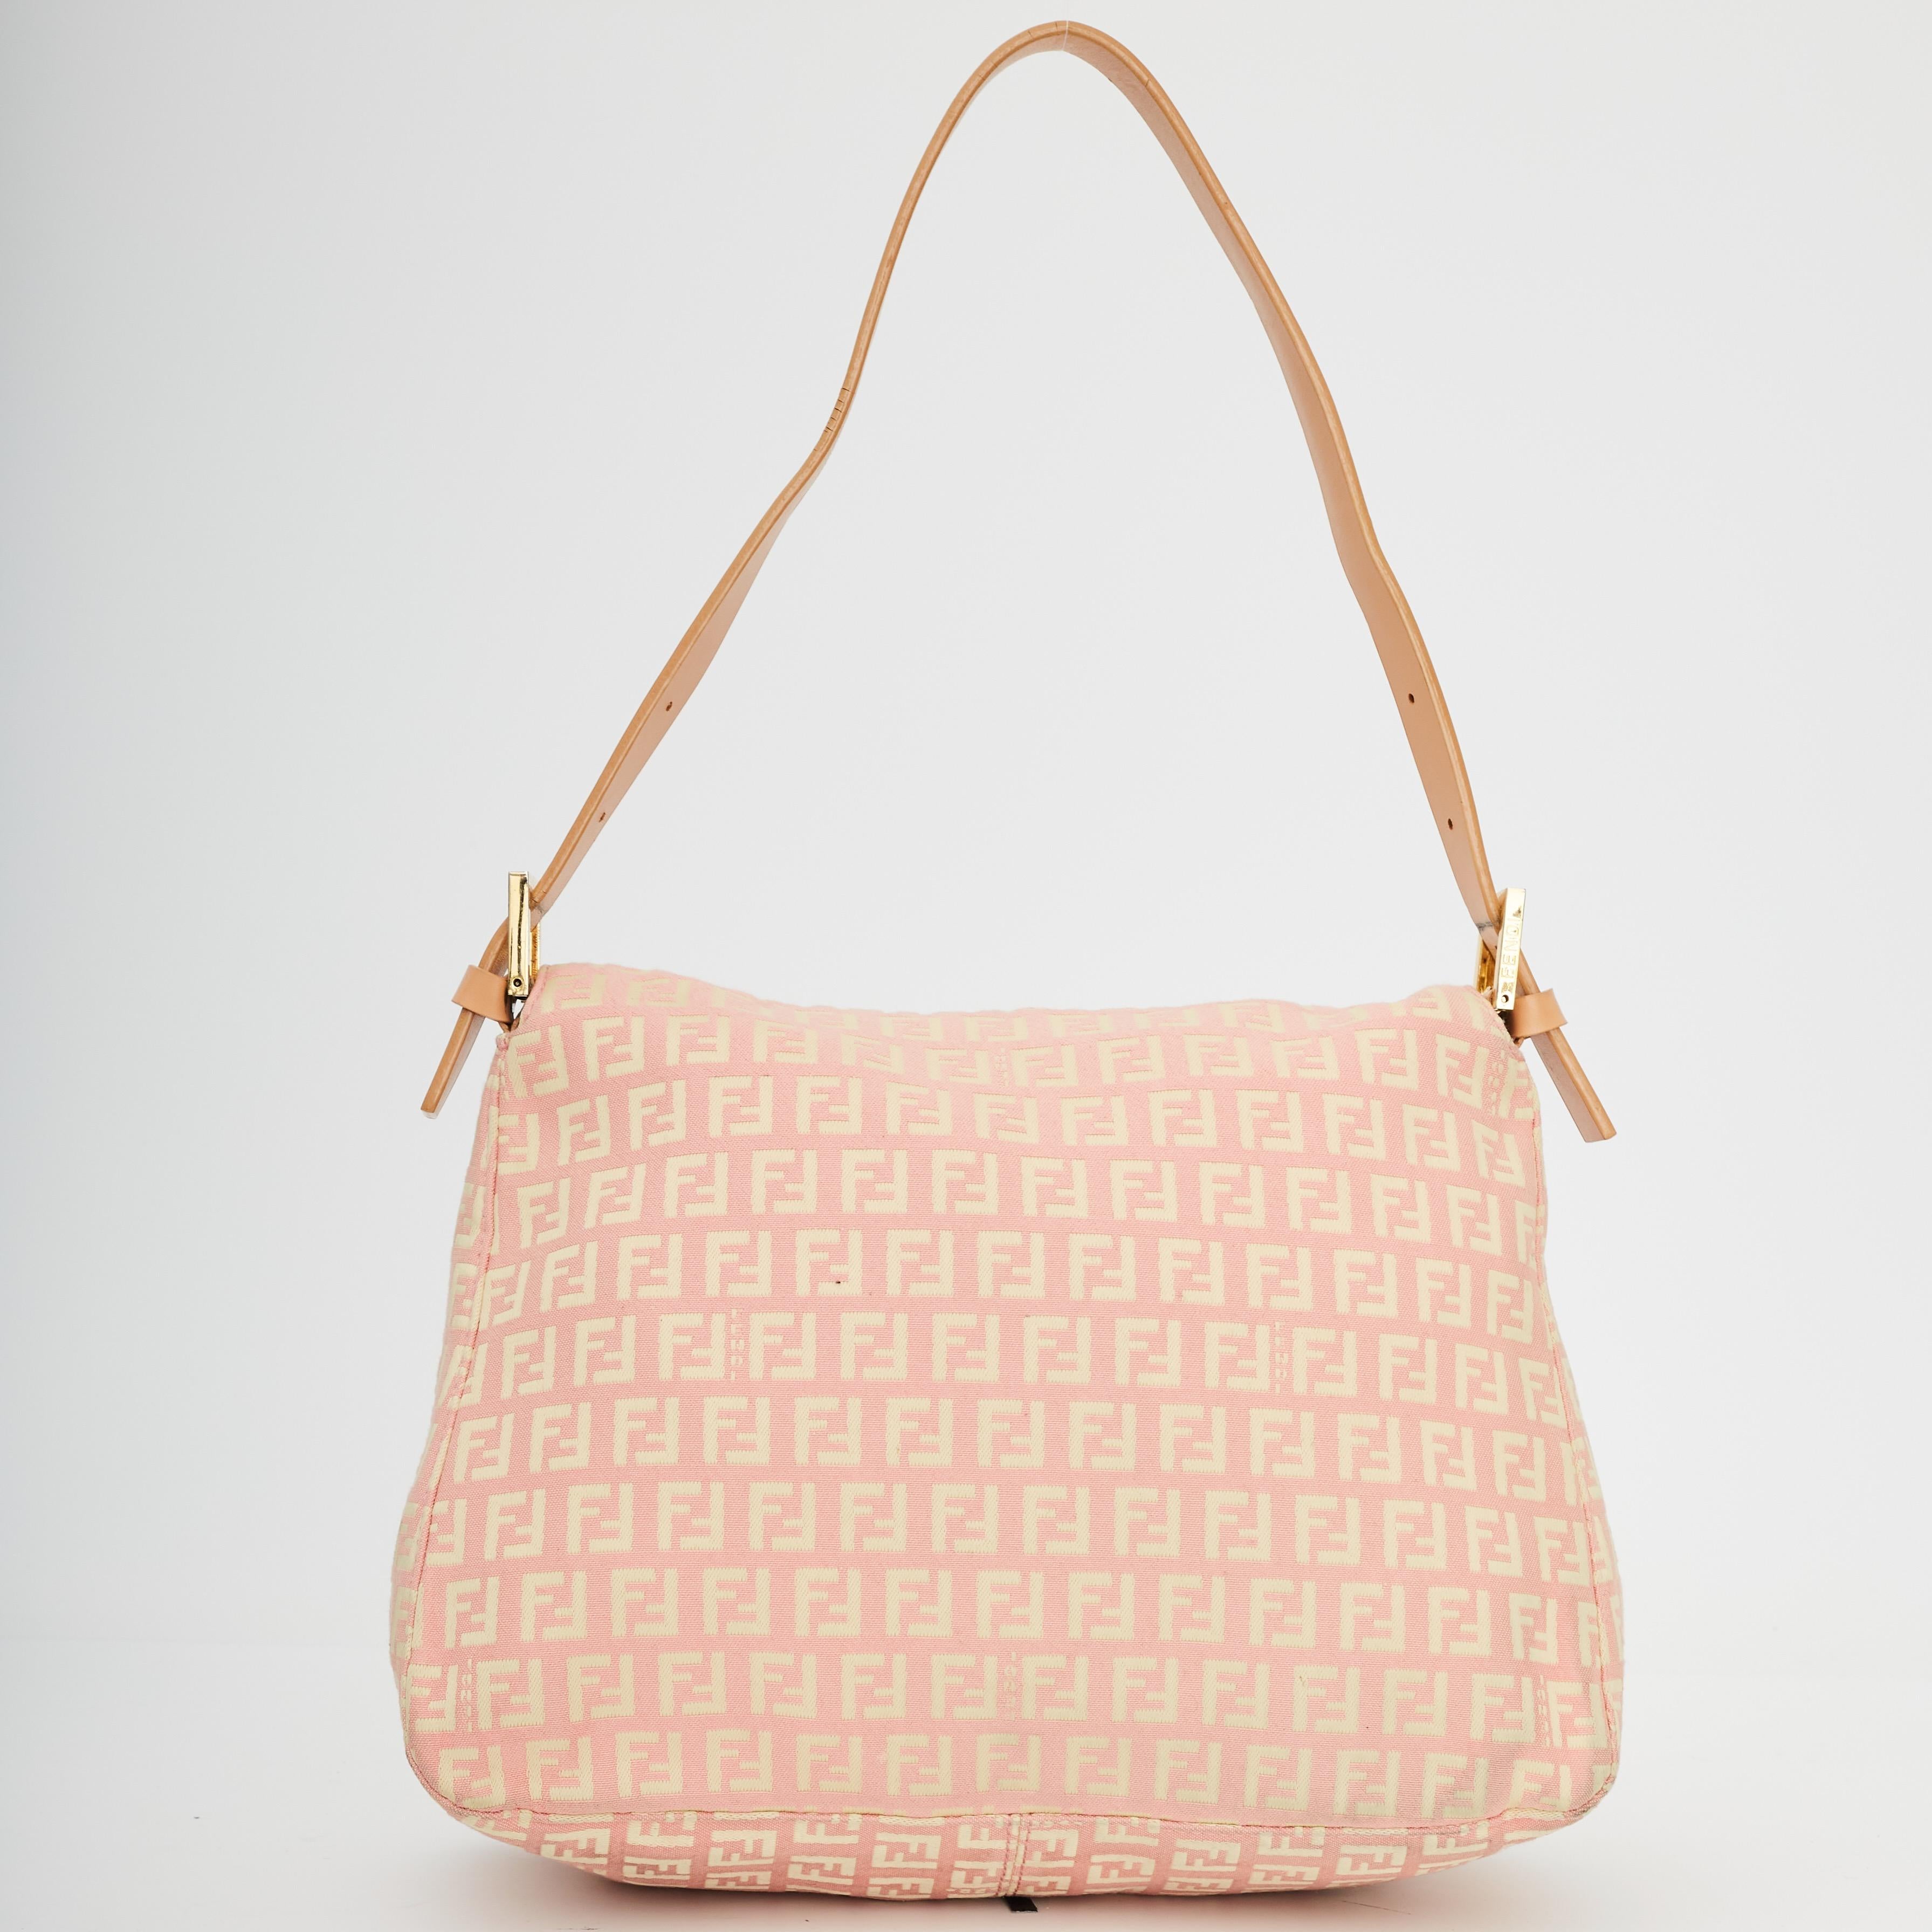 This Mama baguette is made with pink canvas with Fendi Zuccino jacquard throughout. The bag features an adjustable flat leather shoulder strap with polished silver links, a front leather strap with a polished silver FF logo buckle, flap closure with